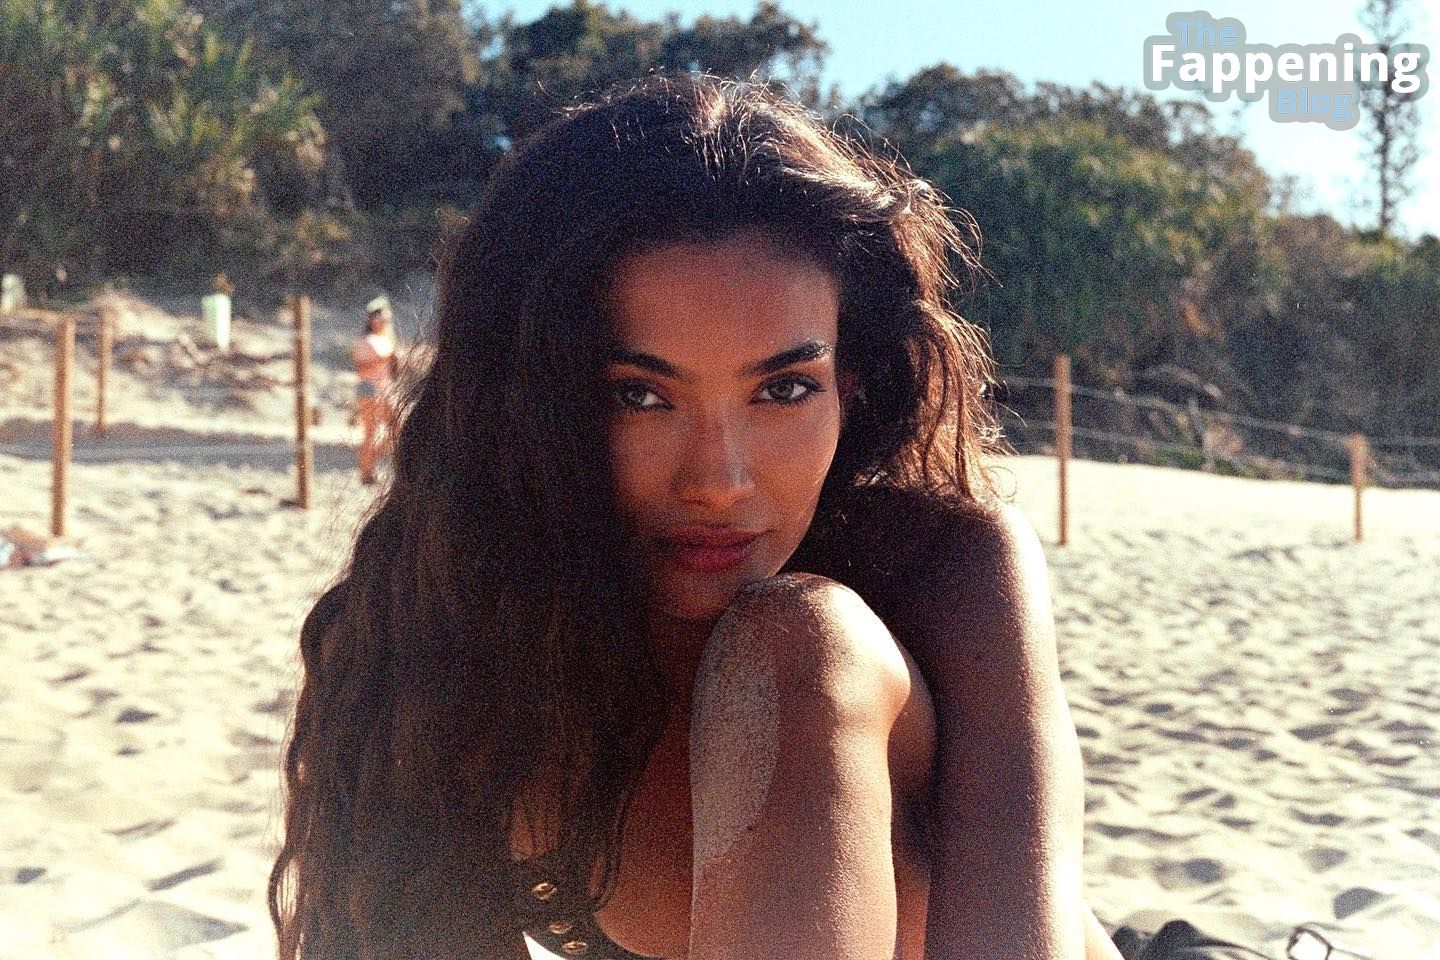 Kelly-Gale-Sexy-The-Fappening-Blog-2.jpg